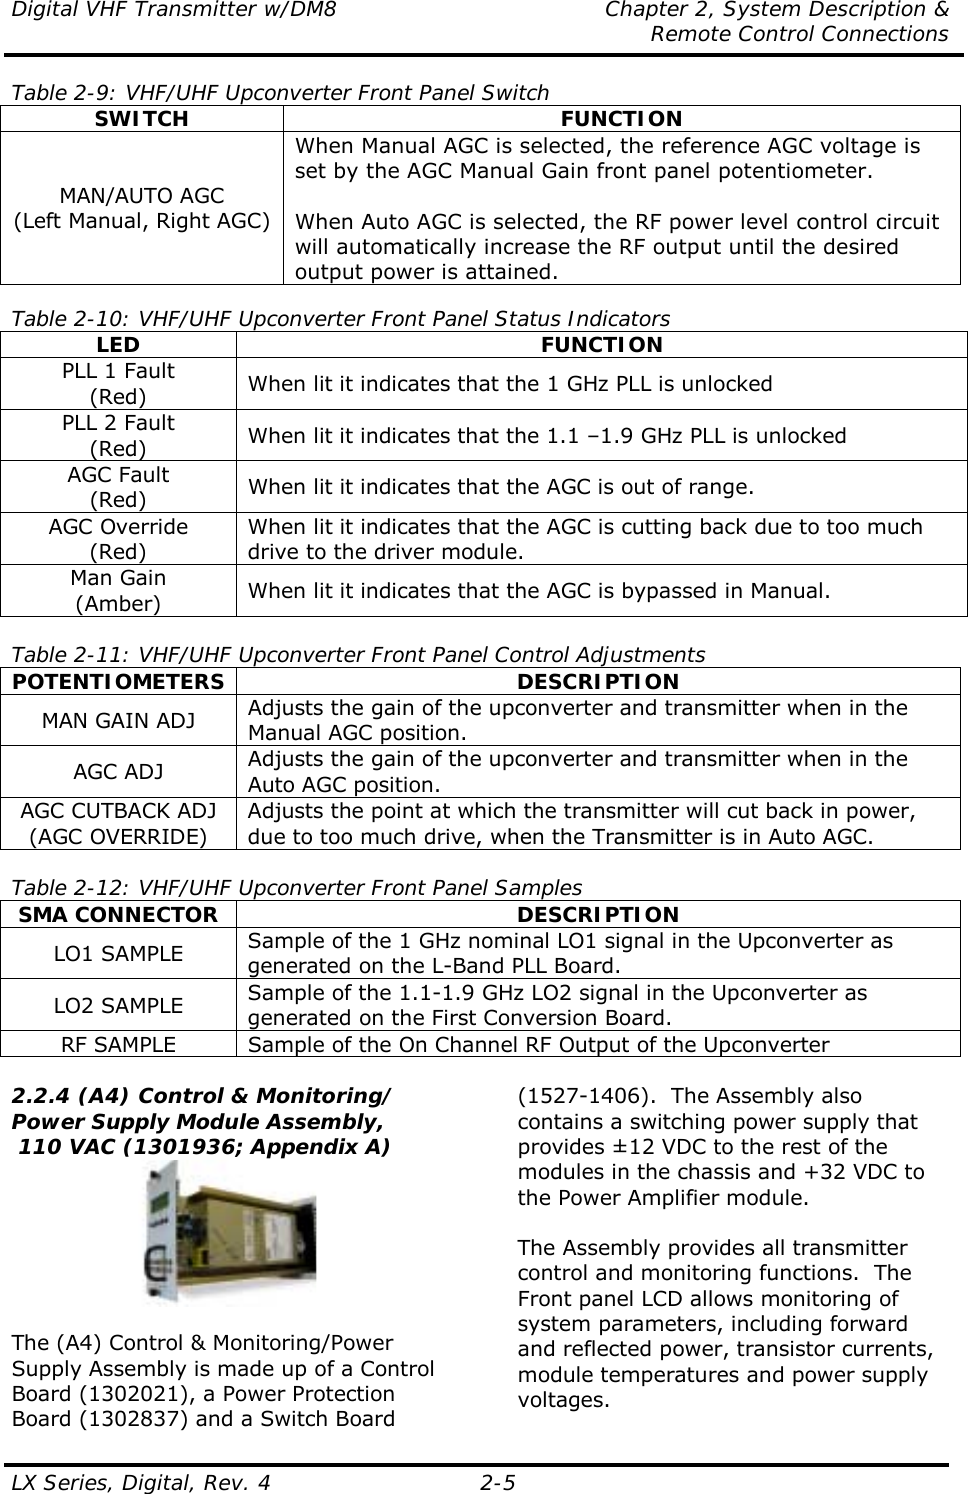 Digital VHF Transmitter w/DM8  Chapter 2, System Description &amp;   Remote Control Connections LX Series, Digital, Rev. 4    2-5 Table 2-9: VHF/UHF Upconverter Front Panel Switch SWITCH FUNCTION MAN/AUTO AGC (Left Manual, Right AGC) When Manual AGC is selected, the reference AGC voltage is set by the AGC Manual Gain front panel potentiometer.   When Auto AGC is selected, the RF power level control circuit will automatically increase the RF output until the desired output power is attained.  Table 2-10: VHF/UHF Upconverter Front Panel Status Indicators LED FUNCTION PLL 1 Fault (Red)  When lit it indicates that the 1 GHz PLL is unlocked PLL 2 Fault (Red)  When lit it indicates that the 1.1 –1.9 GHz PLL is unlocked AGC Fault (Red)  When lit it indicates that the AGC is out of range. AGC Override (Red) When lit it indicates that the AGC is cutting back due to too much drive to the driver module. Man Gain (Amber)  When lit it indicates that the AGC is bypassed in Manual.  Table 2-11: VHF/UHF Upconverter Front Panel Control Adjustments POTENTIOMETERS DESCRIPTION MAN GAIN ADJ  Adjusts the gain of the upconverter and transmitter when in the Manual AGC position. AGC ADJ  Adjusts the gain of the upconverter and transmitter when in the Auto AGC position. AGC CUTBACK ADJ (AGC OVERRIDE) Adjusts the point at which the transmitter will cut back in power, due to too much drive, when the Transmitter is in Auto AGC.  Table 2-12: VHF/UHF Upconverter Front Panel Samples SMA CONNECTOR  DESCRIPTION LO1 SAMPLE  Sample of the 1 GHz nominal LO1 signal in the Upconverter as generated on the L-Band PLL Board. LO2 SAMPLE  Sample of the 1.1-1.9 GHz LO2 signal in the Upconverter as generated on the First Conversion Board. RF SAMPLE  Sample of the On Channel RF Output of the Upconverter  2.2.4 (A4) Control &amp; Monitoring/ Power Supply Module Assembly,  110 VAC (1301936; Appendix A)   The (A4) Control &amp; Monitoring/Power Supply Assembly is made up of a Control Board (1302021), a Power Protection Board (1302837) and a Switch Board   (1527-1406).  The Assembly also contains a switching power supply that provides ±12 VDC to the rest of the modules in the chassis and +32 VDC to the Power Amplifier module.  The Assembly provides all transmitter control and monitoring functions.  The Front panel LCD allows monitoring of system parameters, including forward and reflected power, transistor currents, module temperatures and power supply voltages.  